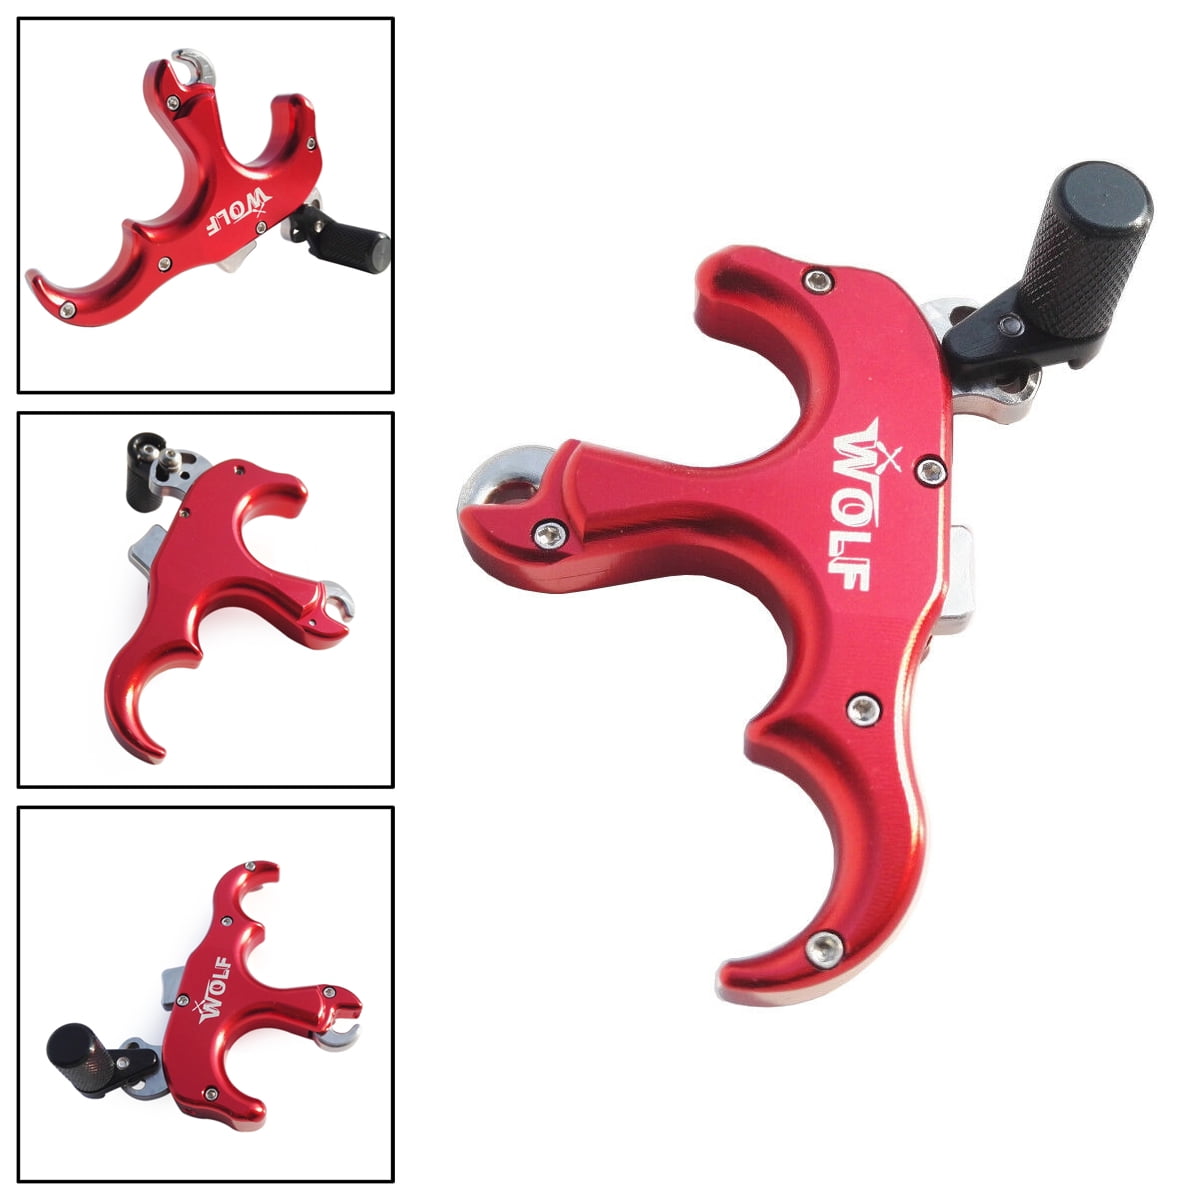 Bow Release Aids,3 or 4 Fingers Grip Adjustable Automatic Archery Release,Thumb Trigger for Compound Bow Accessory，Suitable for Lightweight Beginners Under 40 pounds